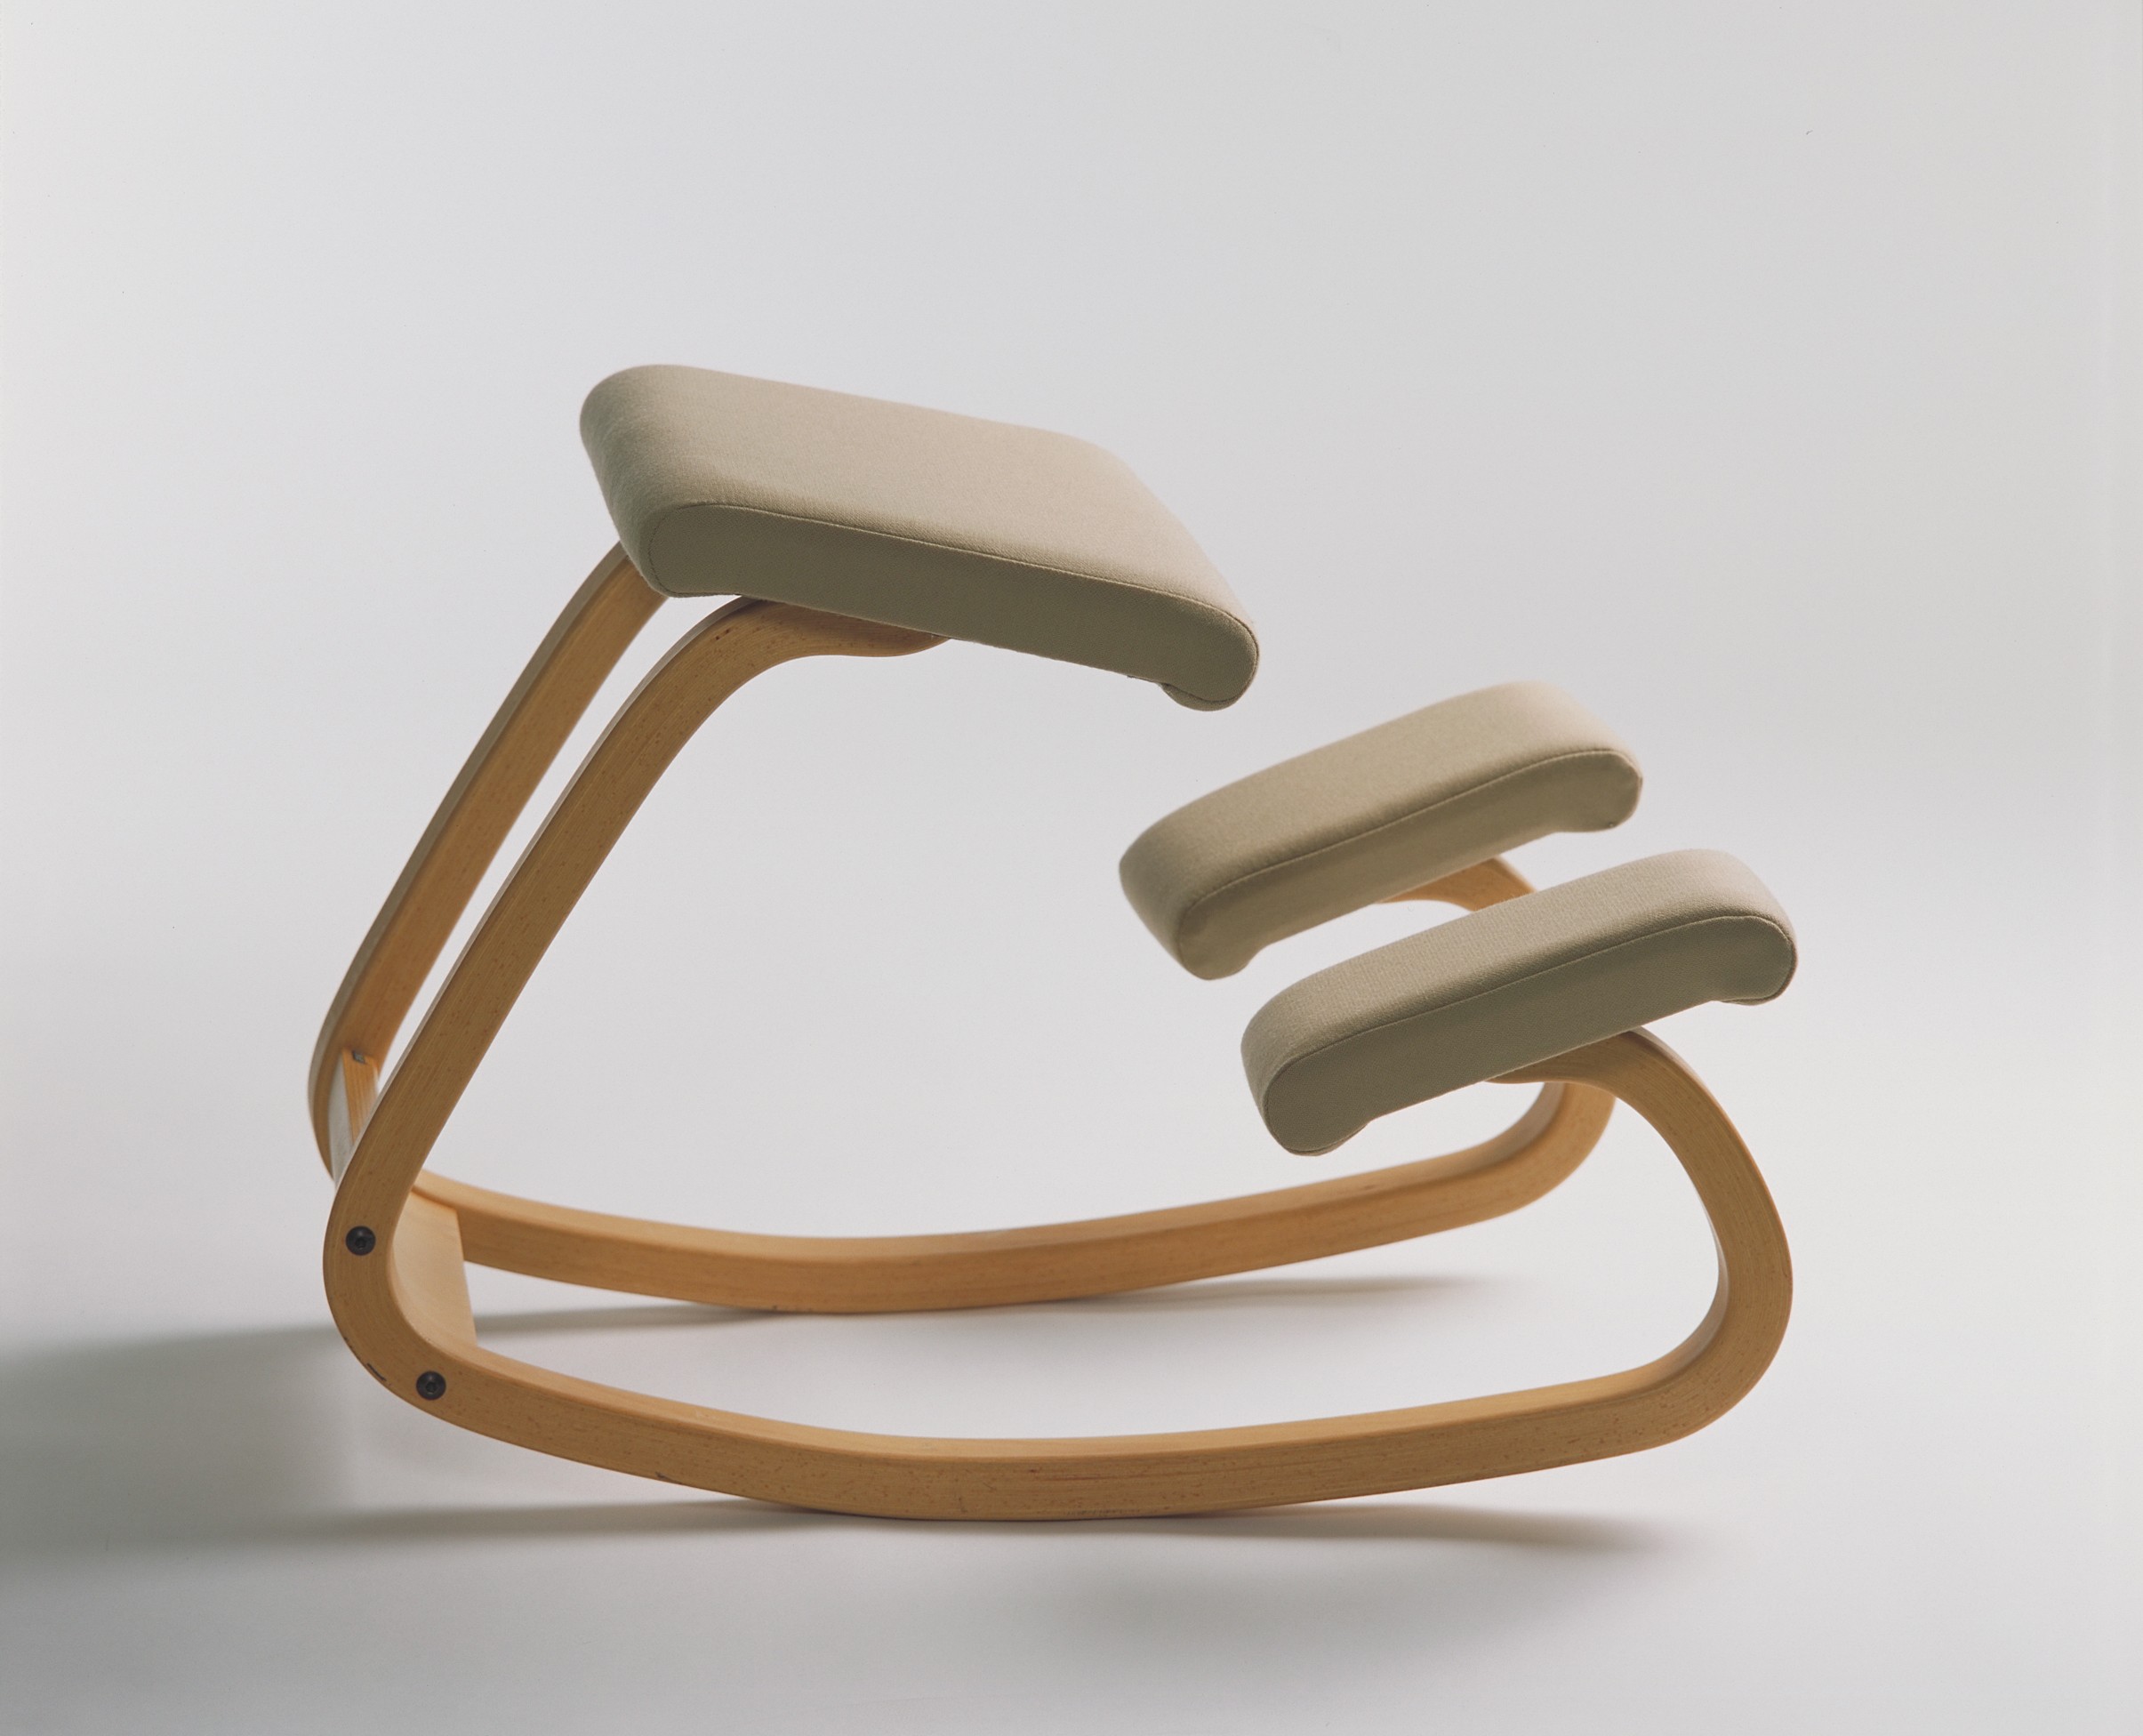 SEVERAL SEATS: The Chairs of Peter Opsvik